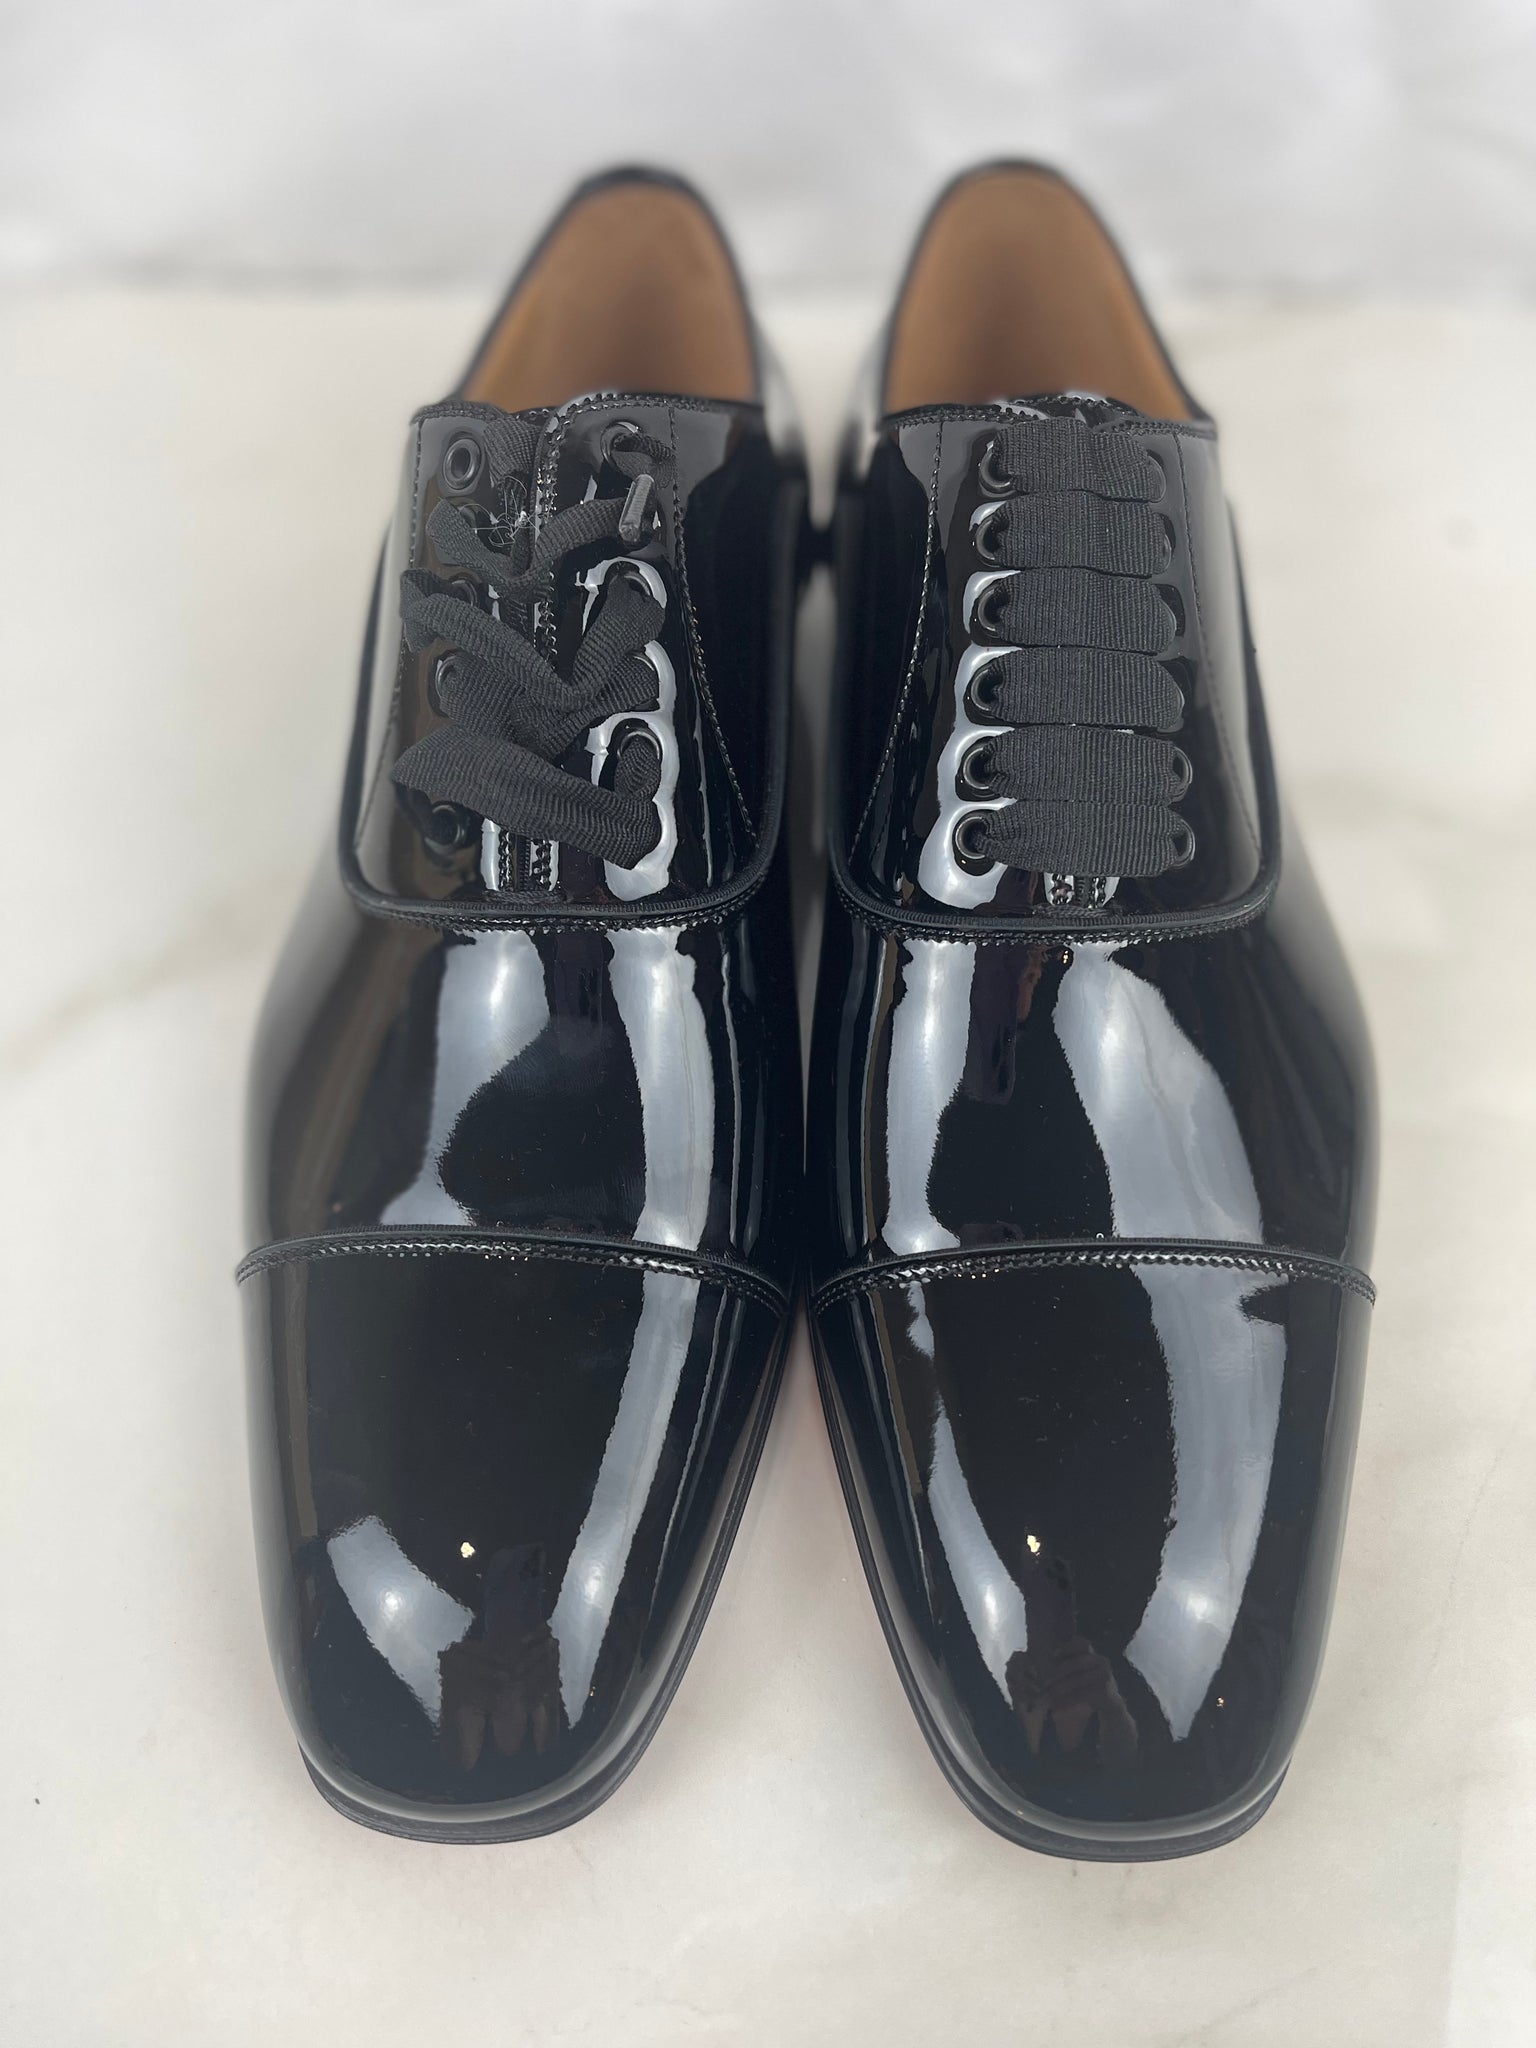 CHRISTIAN LOUBOUTIN Greggo Men's Lace-Up Leather Patent Dress Shoes Si –  Certified Consignment